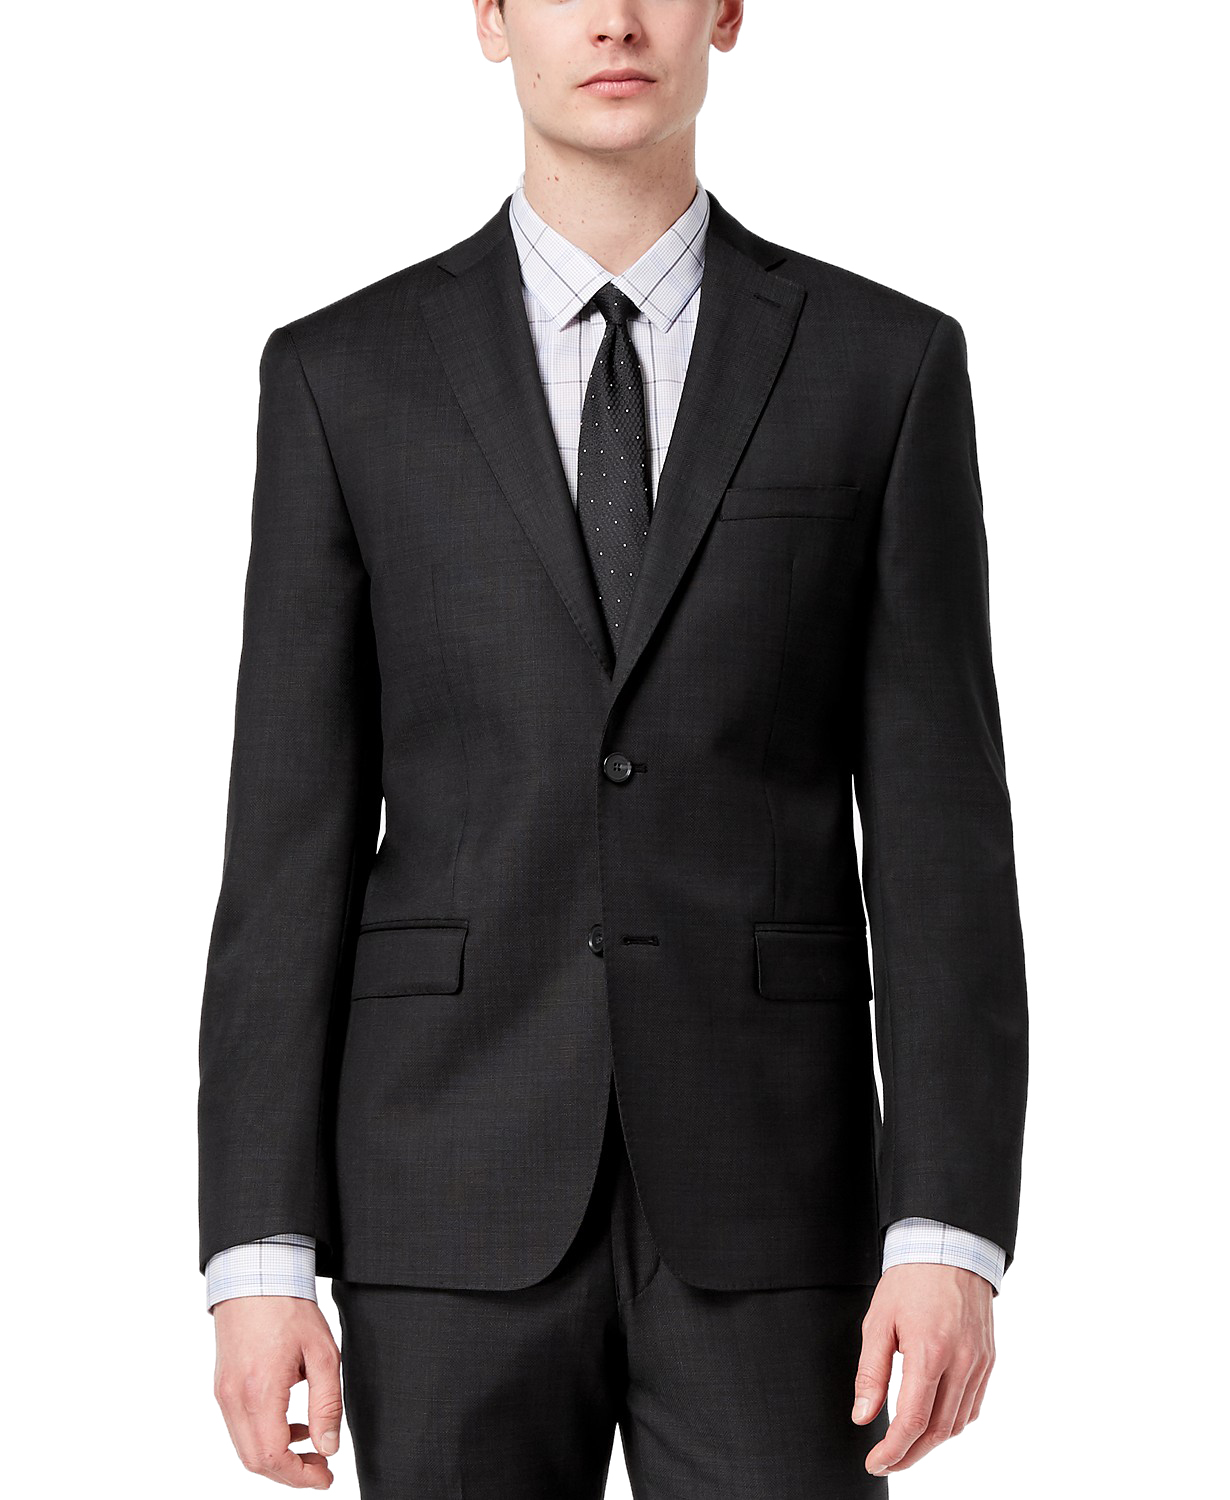 www.couturepoint.com-dkny-mens-black-wool-modern-fit-stretch-textured-suit-jacket